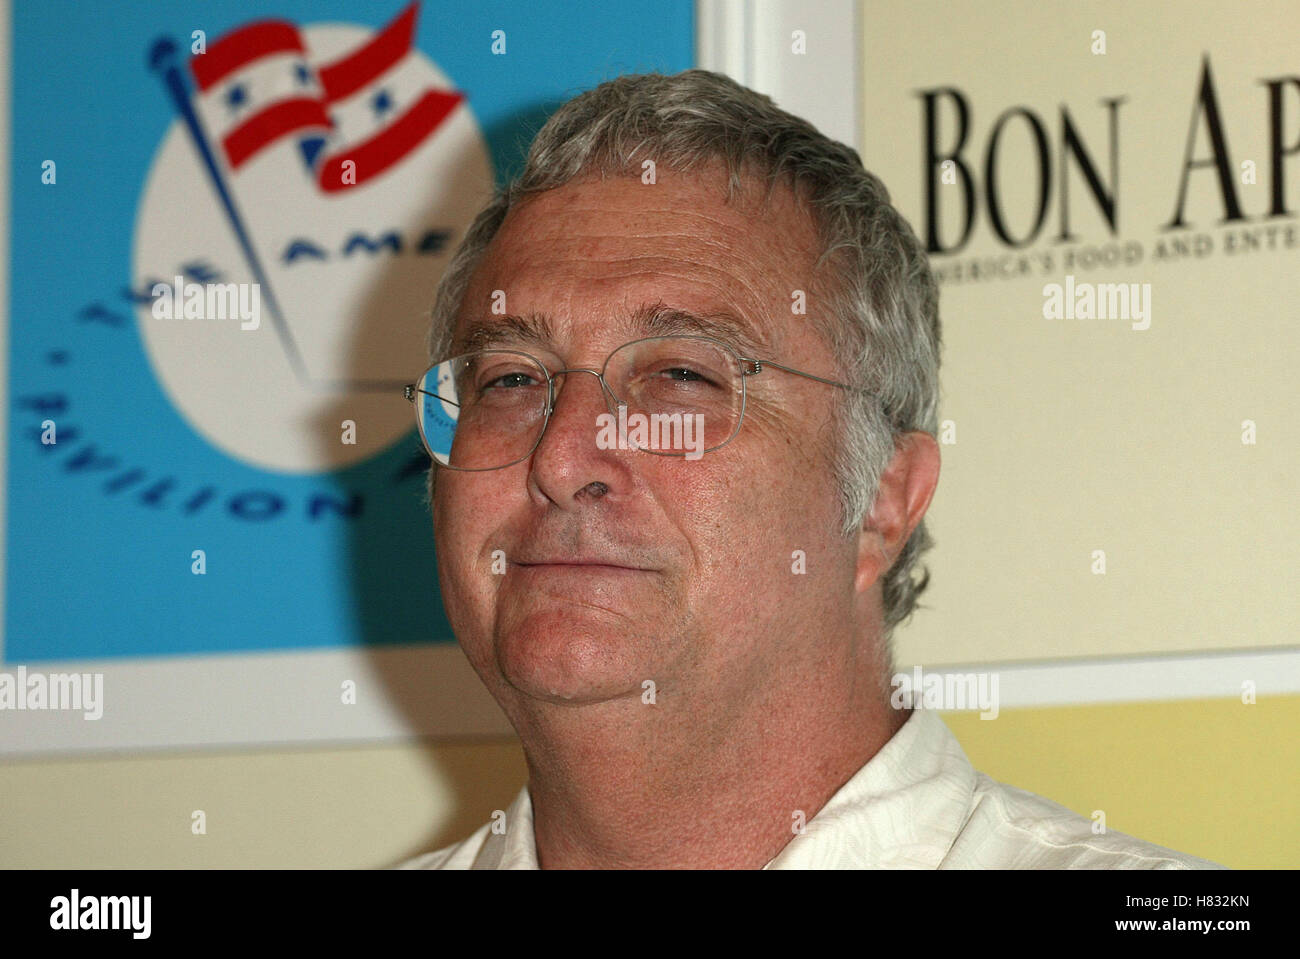 RANDY NEWMAN CANNES FILM FESTIVAL 2002 CANNES FILM FESTIVAL CANNES FRANCE 17 May 2002 Stock Photo